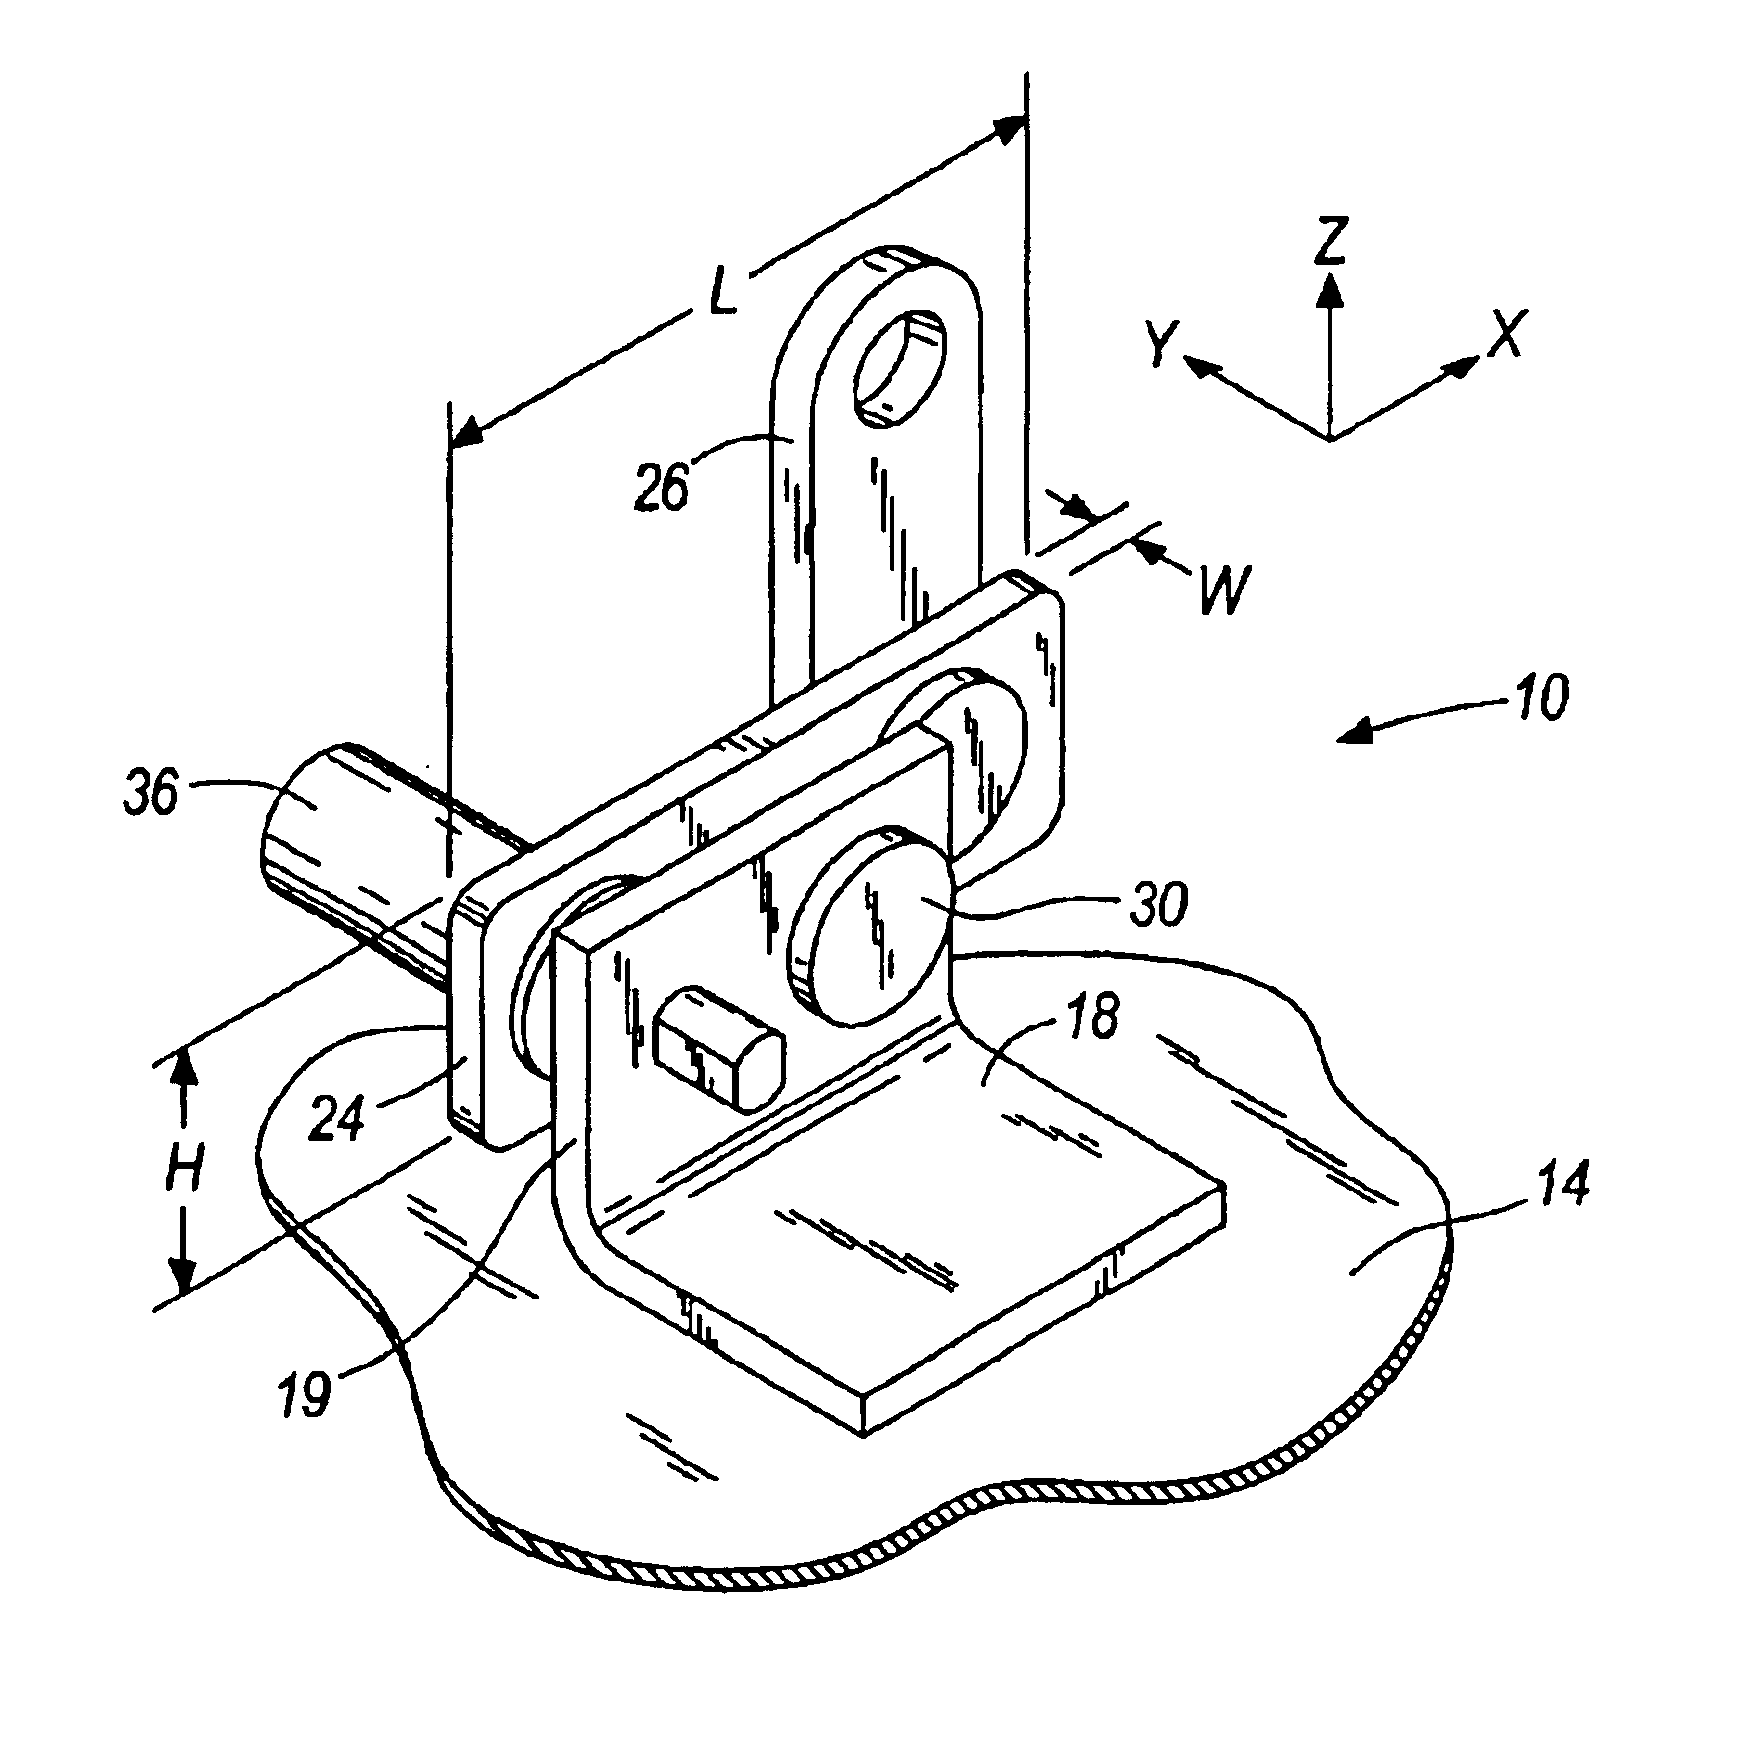 Apparatus and method for measuring the weight of an occupant in a vehicle